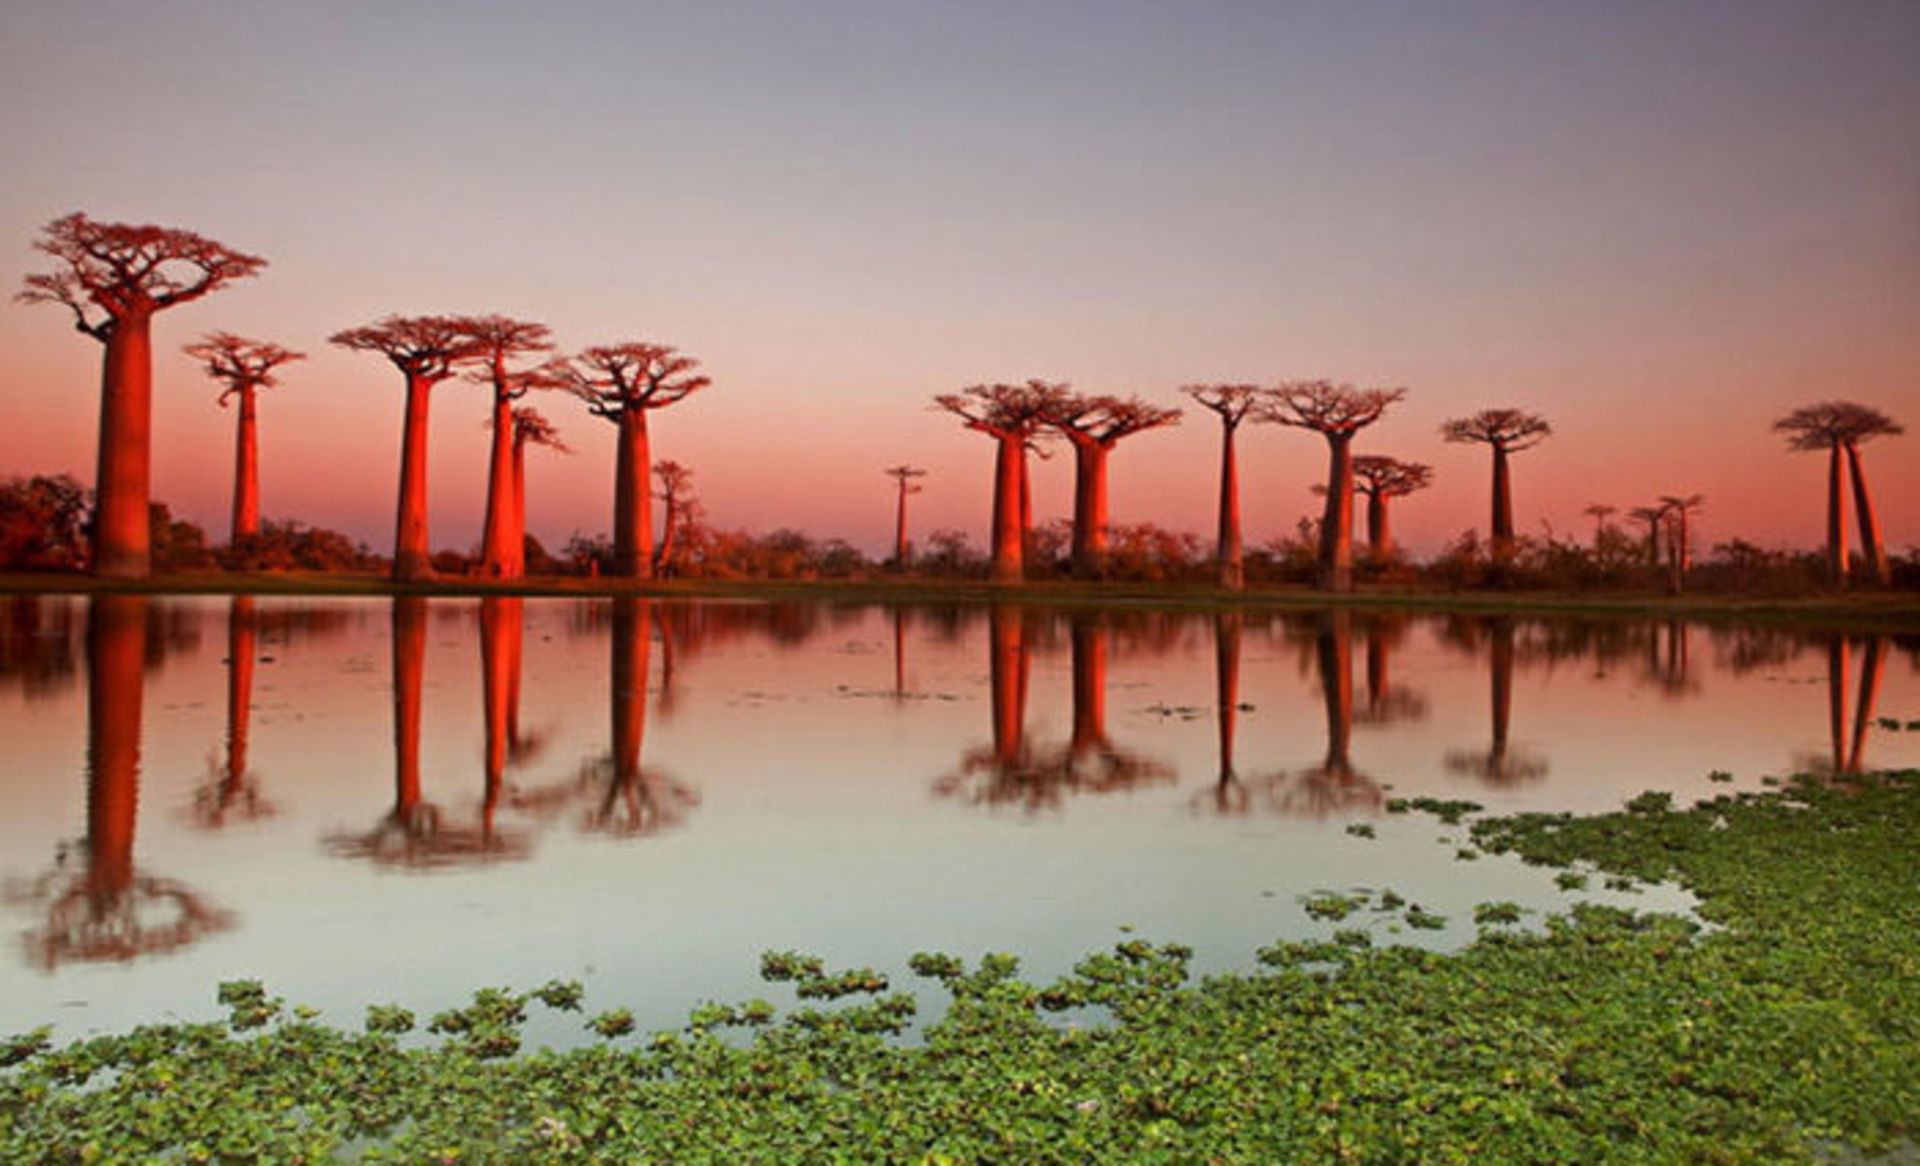 Top-10-Streets-Baobab-Photo-by-Marcel-Staron-740x449